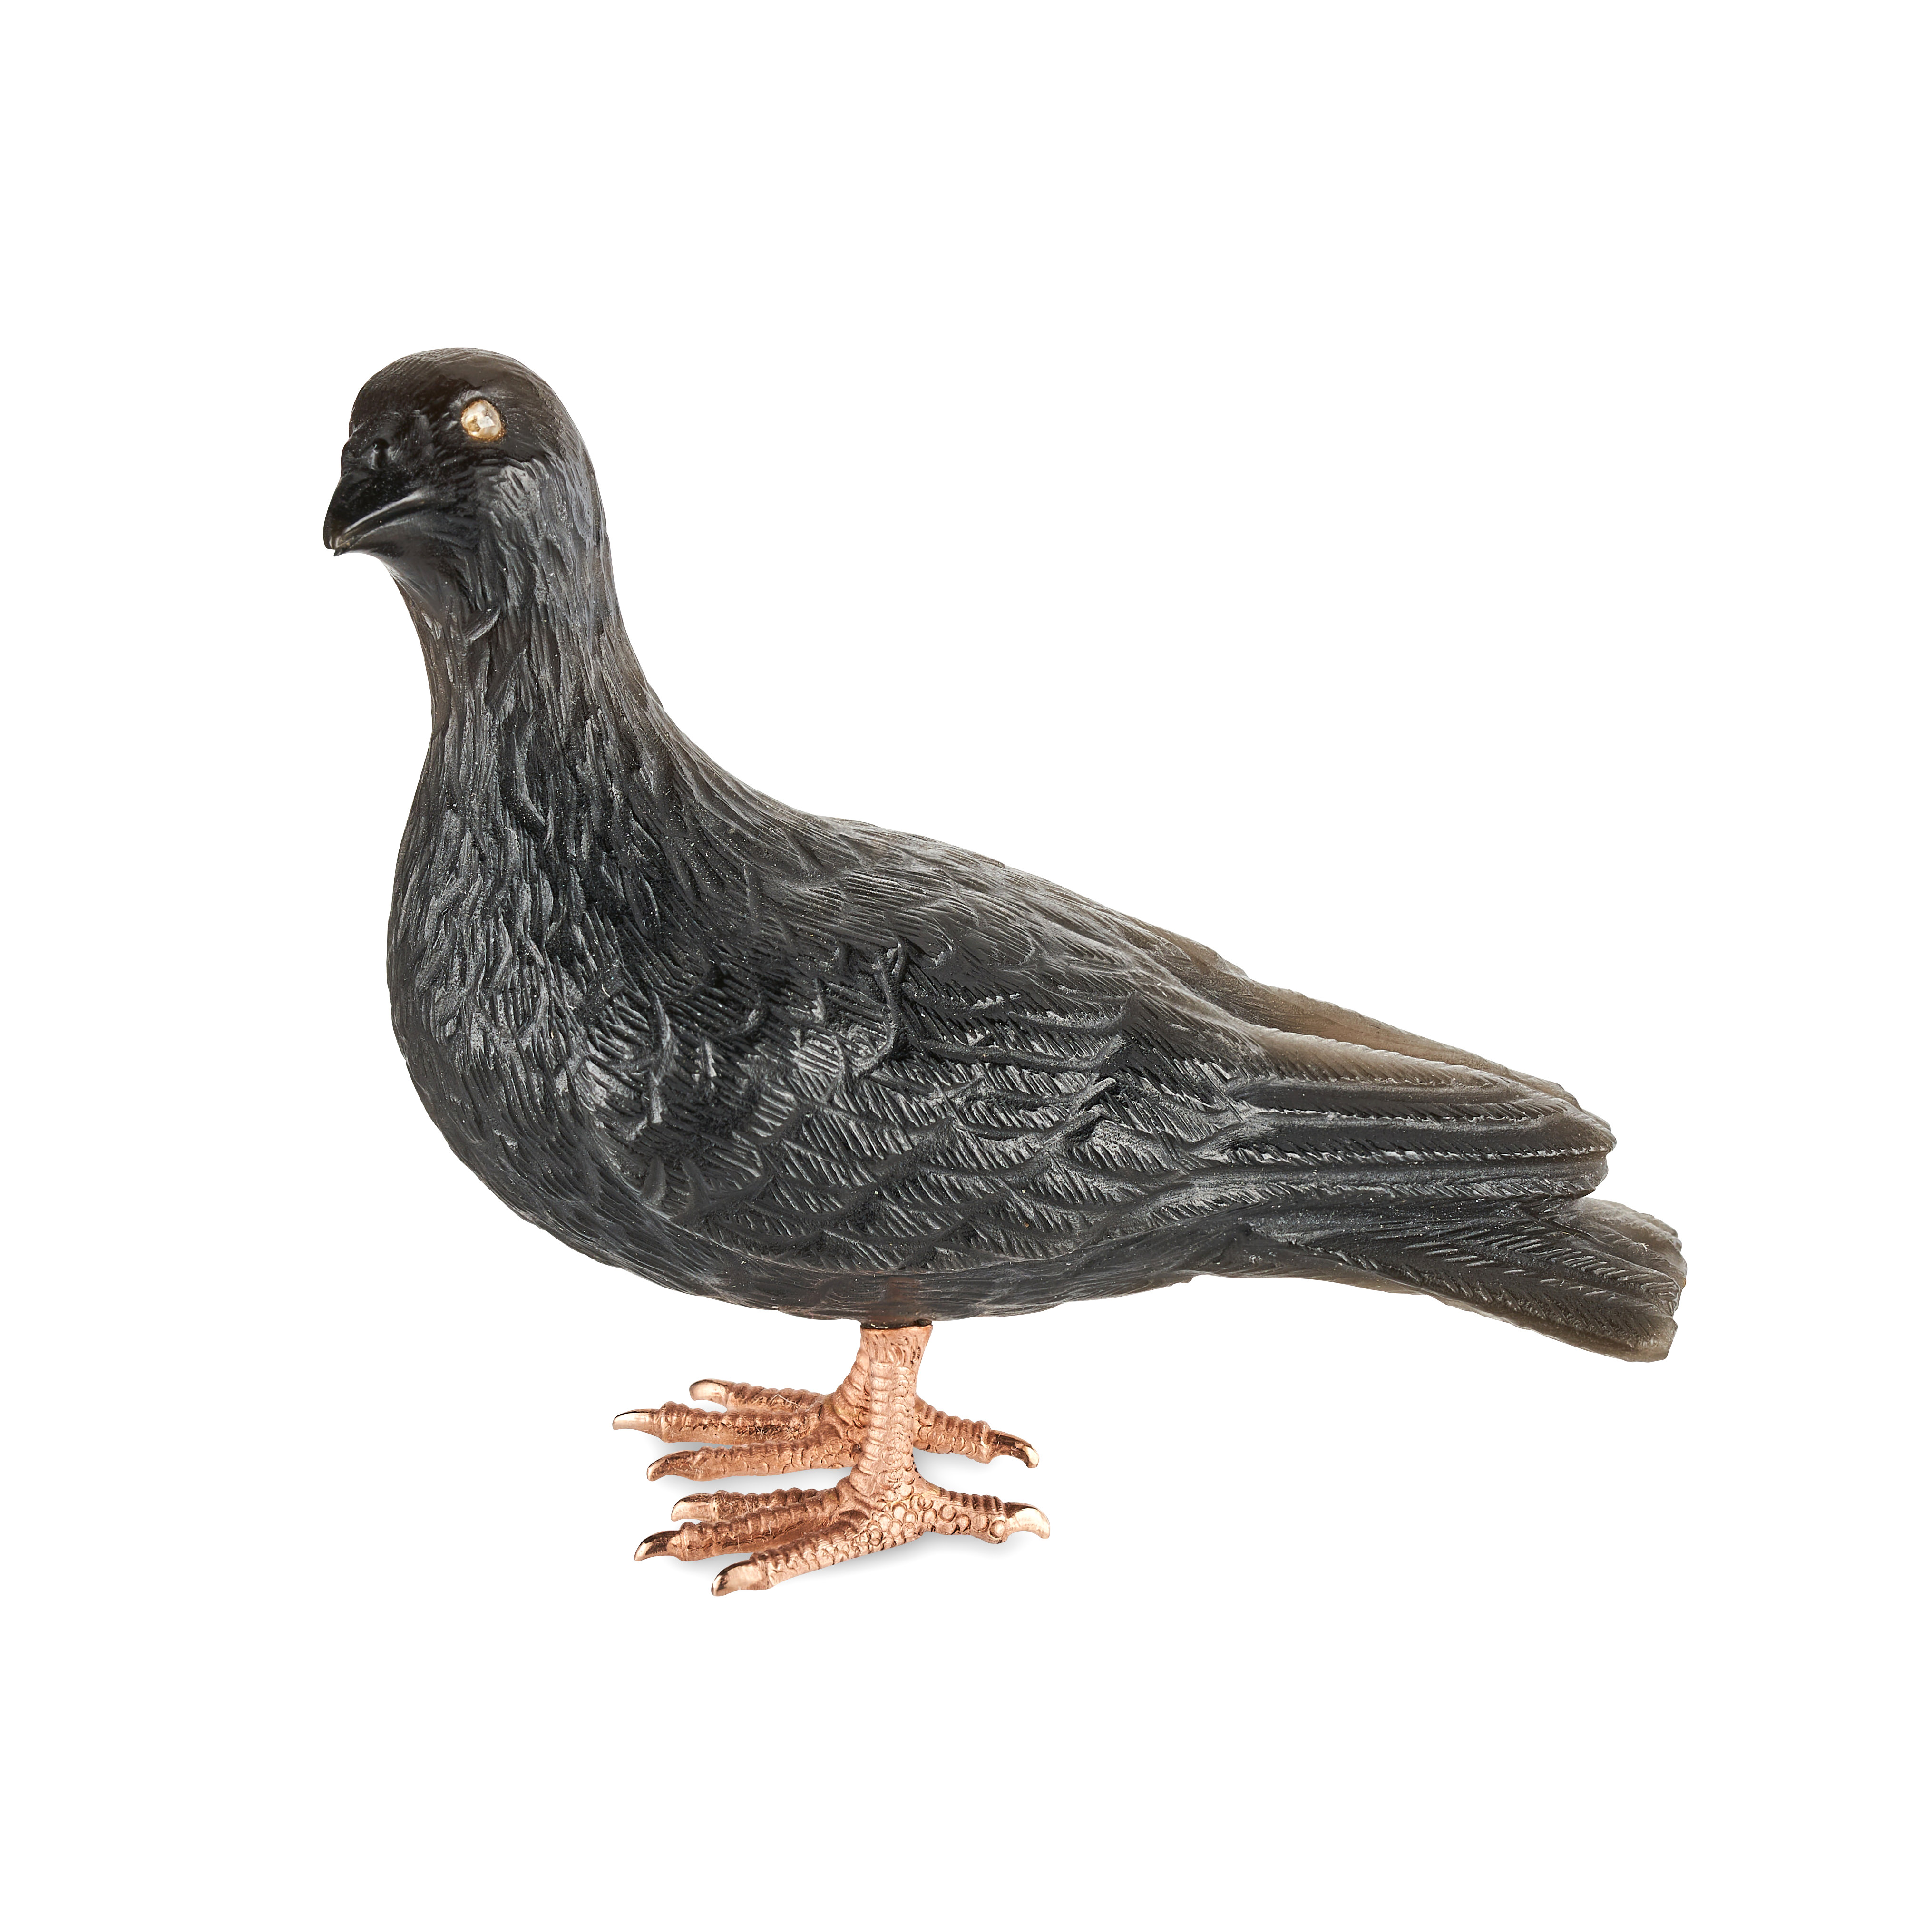 FABERGE, AN IMPORTANT IMPERIAL JEWELLED GOLD MOUNTED CARVED OBSIDIAN MODEL OF A CARRIER PIGEON, S... - Image 3 of 11